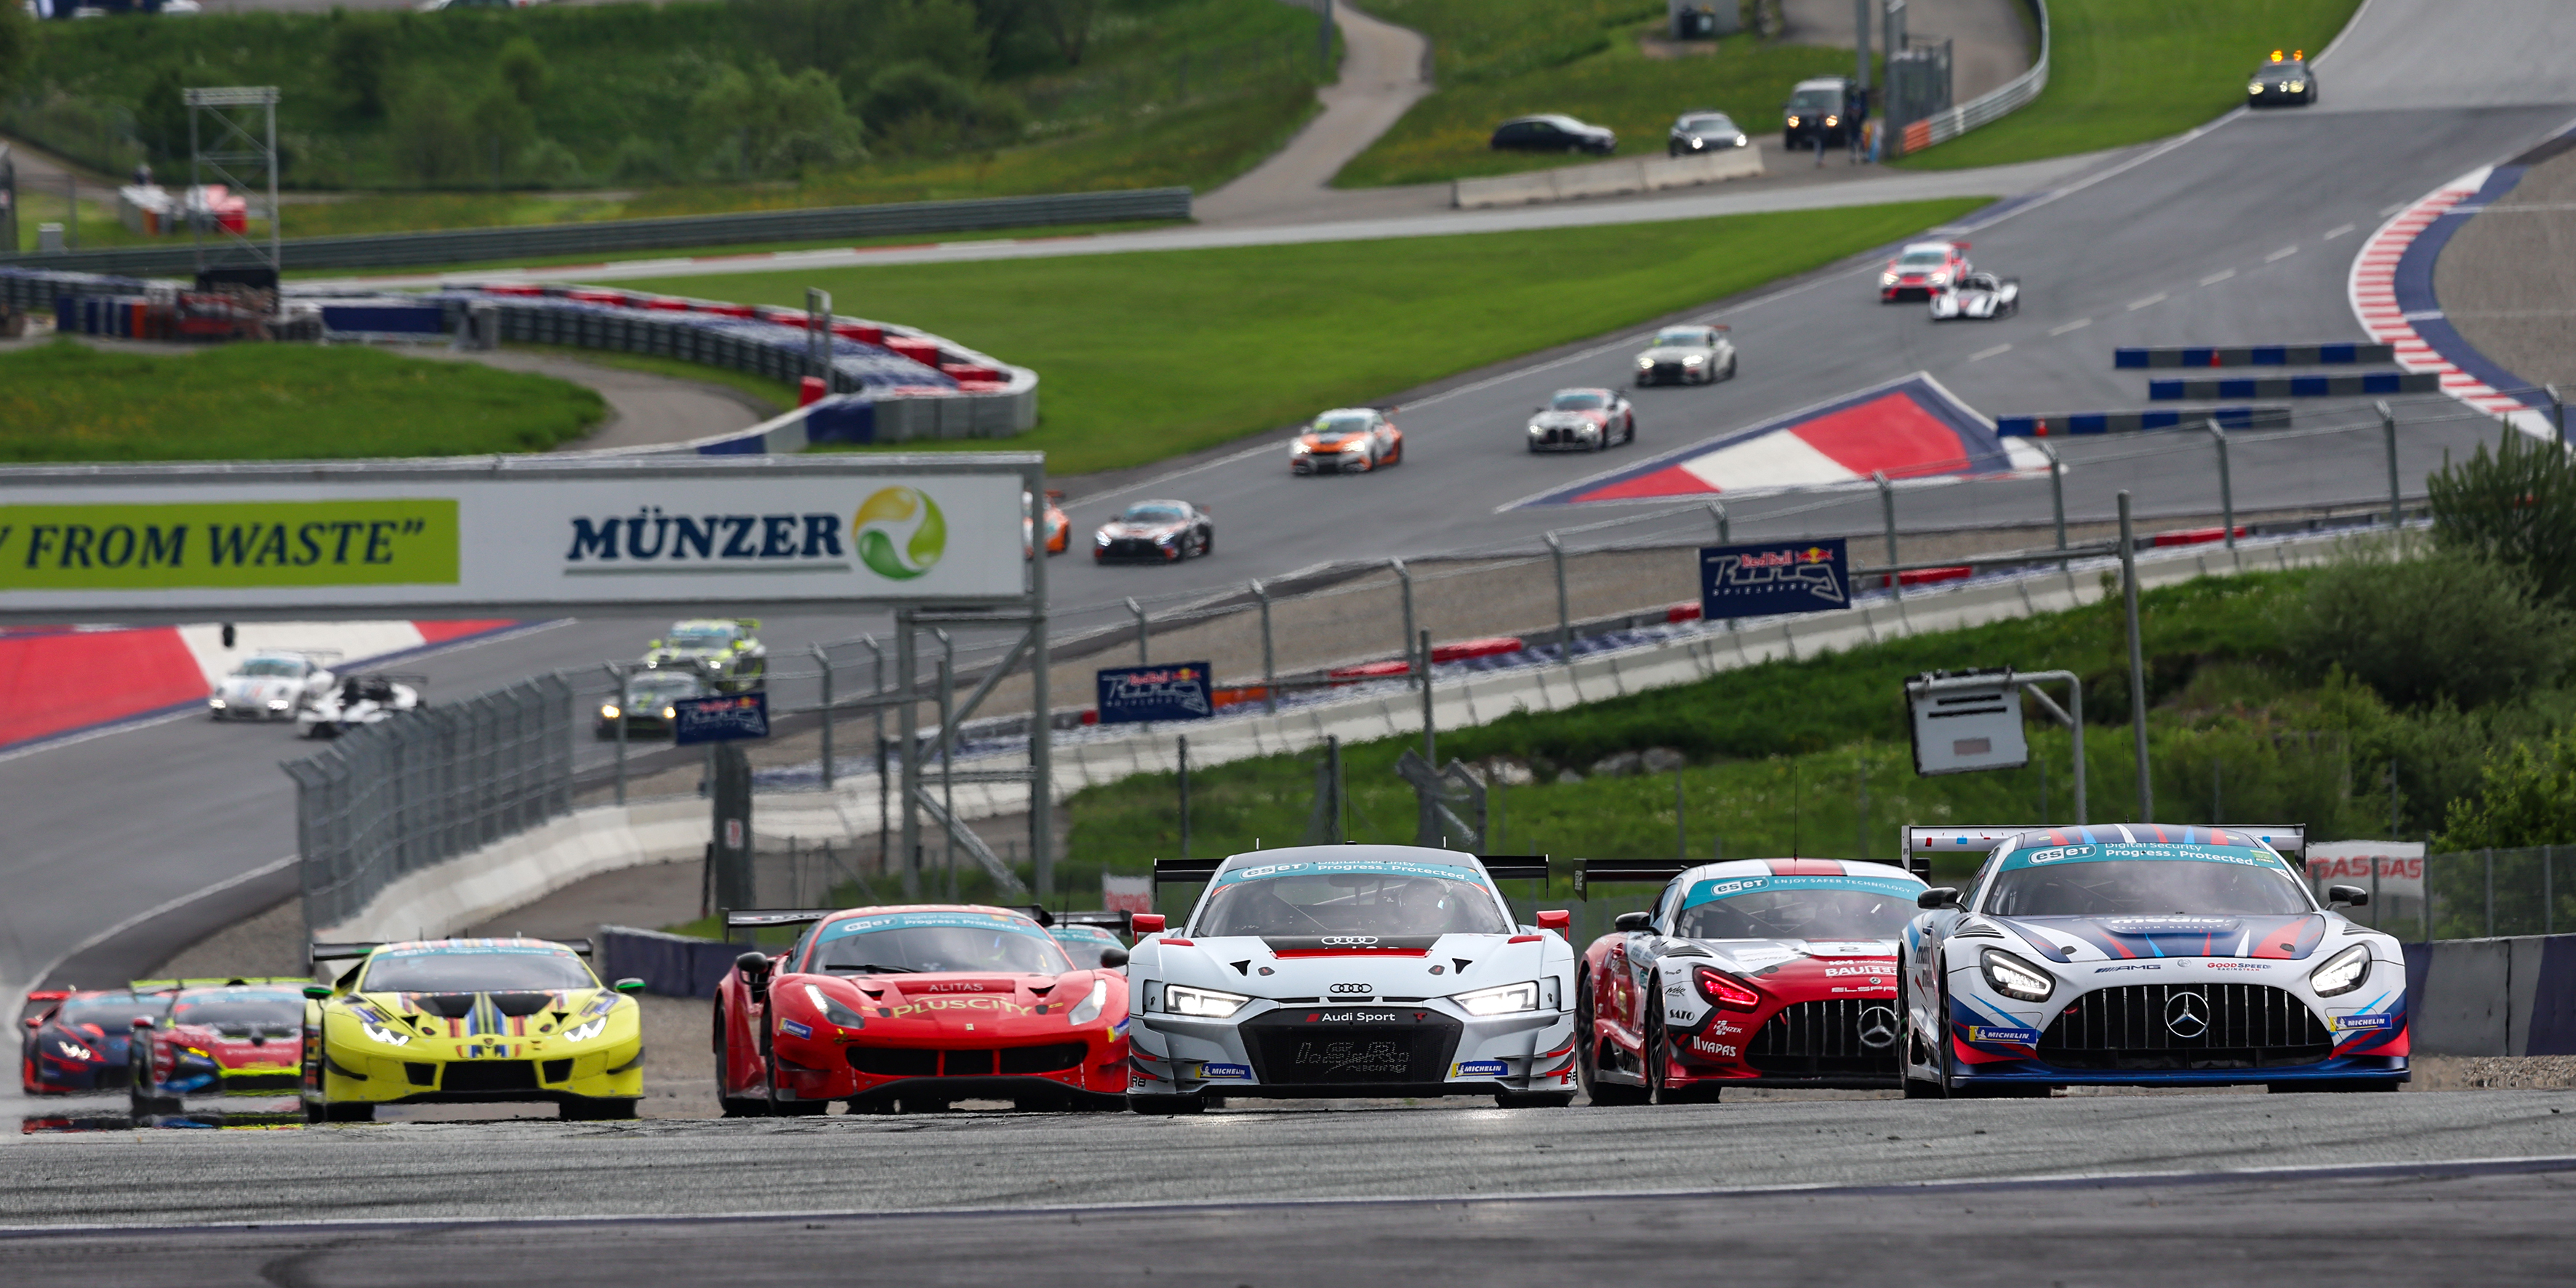 Filip Salaquarda dominates in tricky conditions at Red Bull Ring